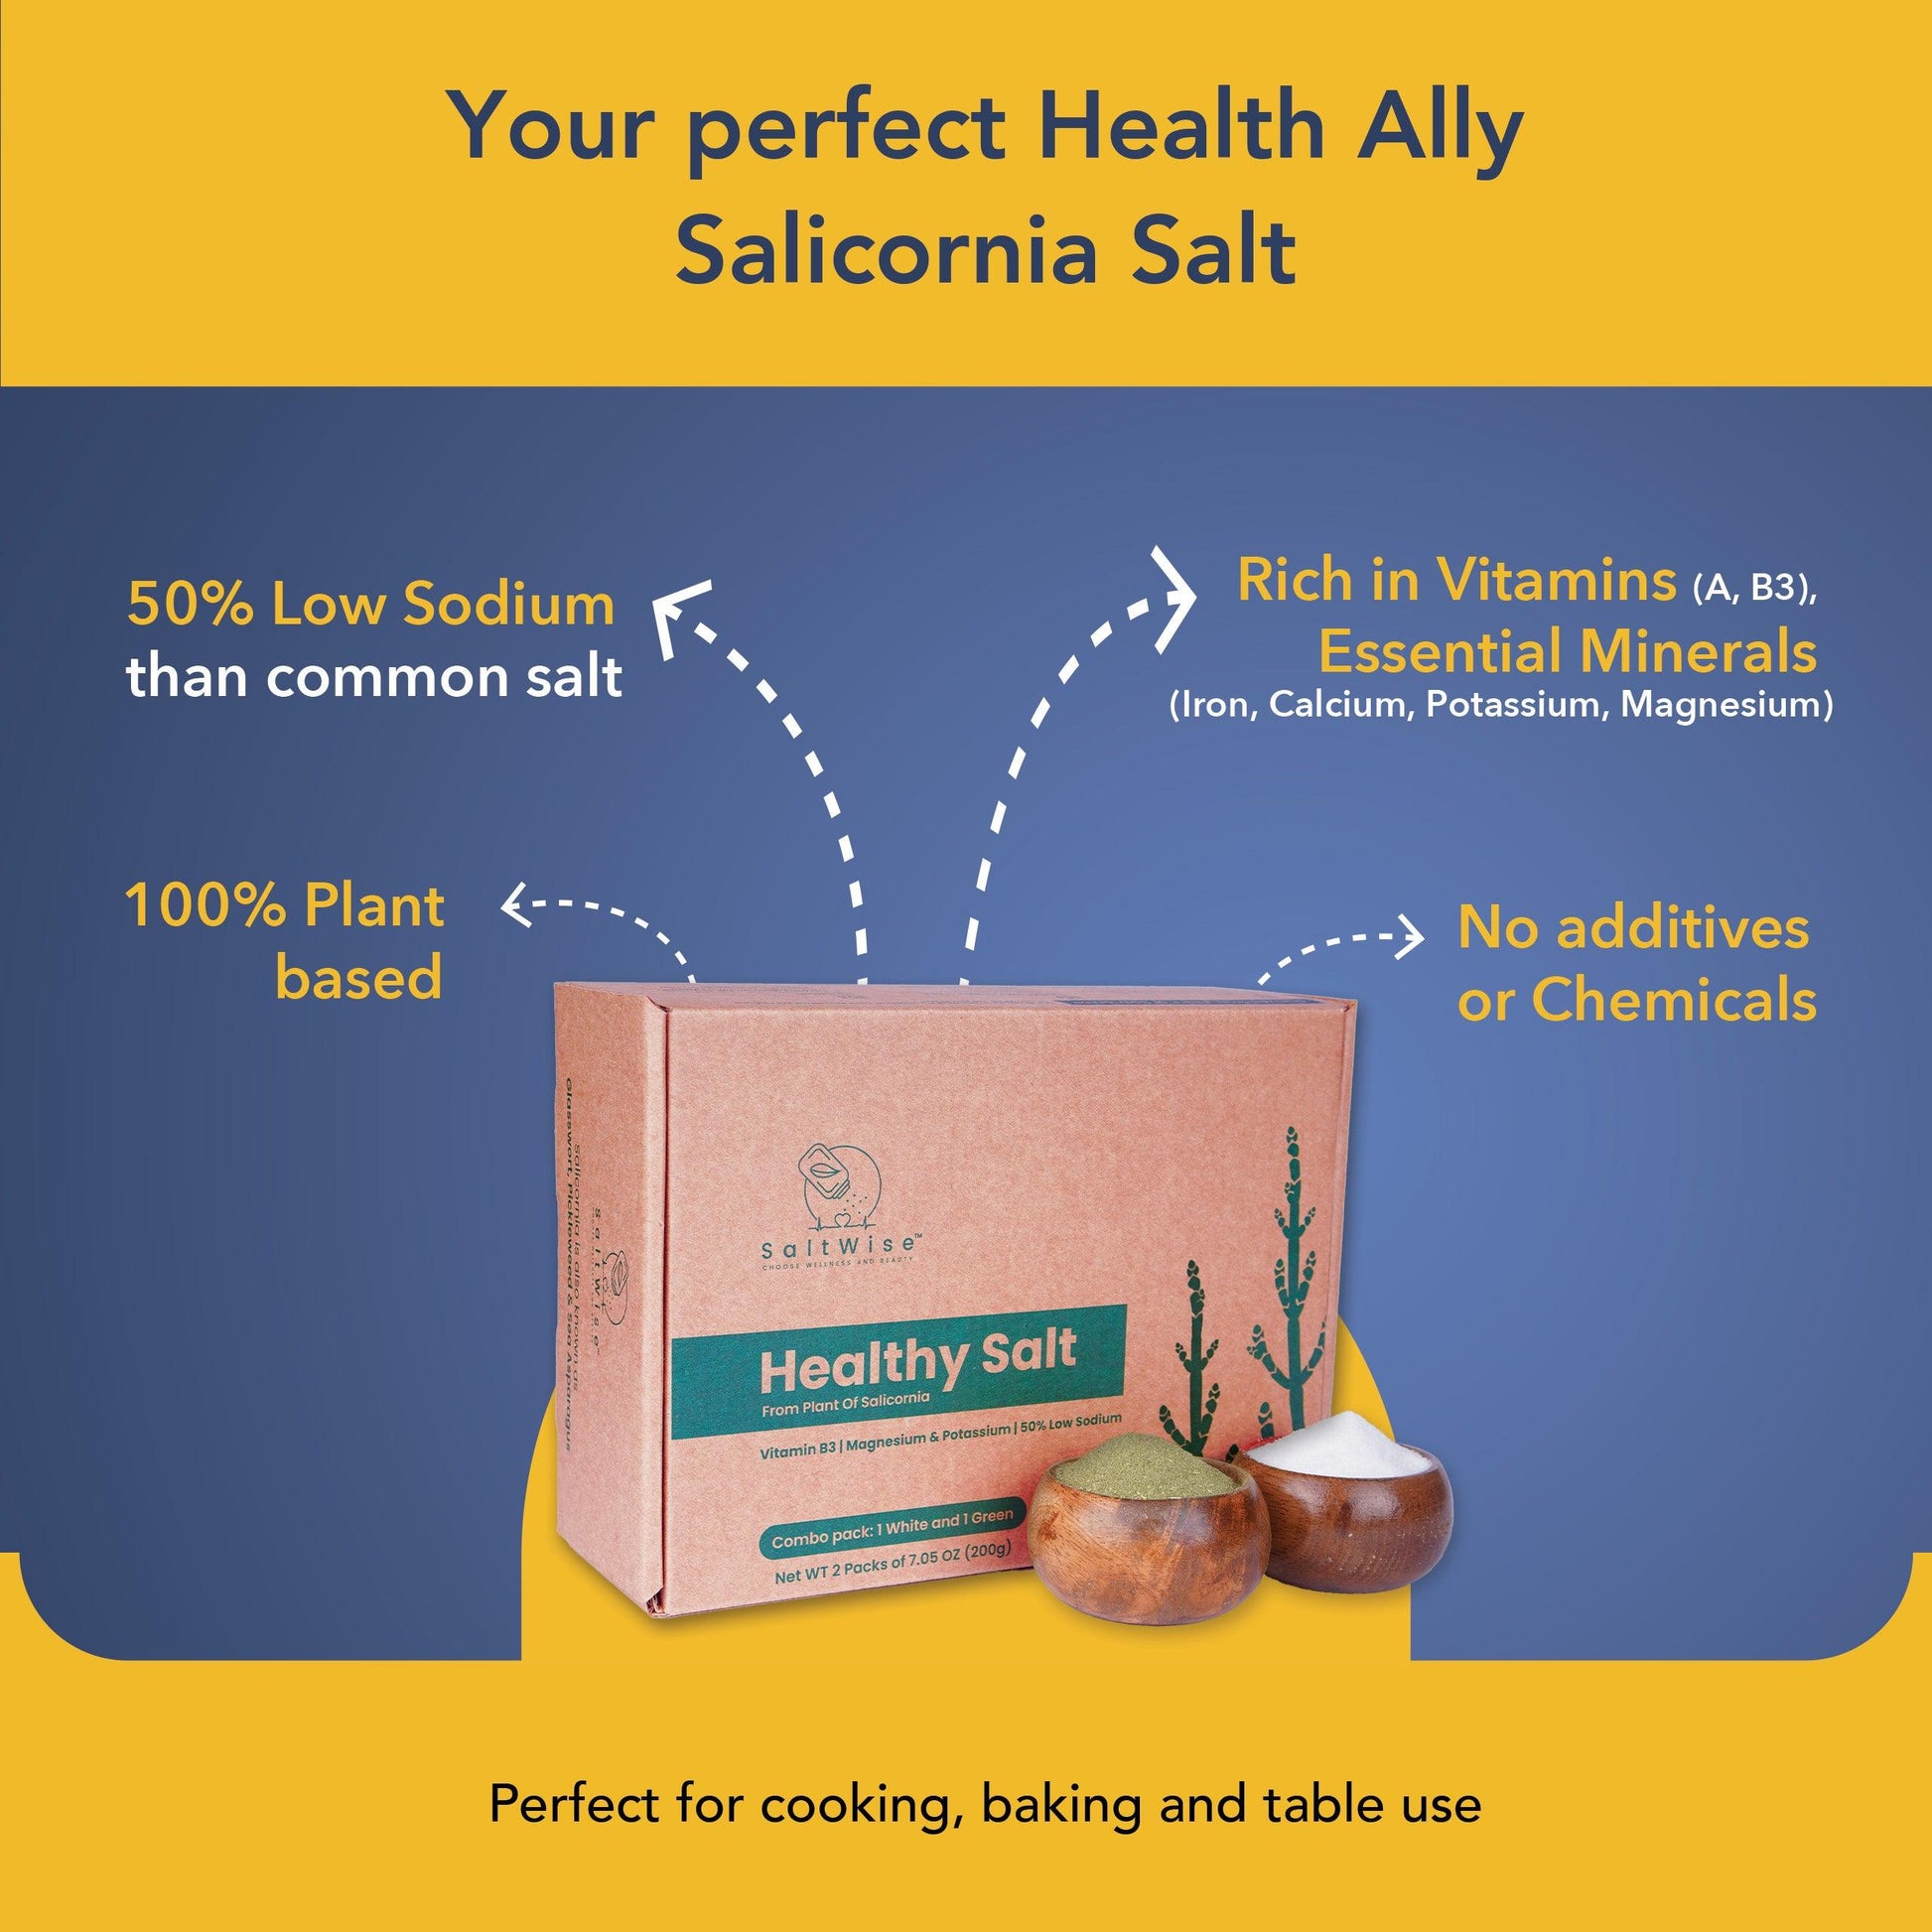 Salicornia Salt Combo Pack - contains 1 Green Salt, 1 White Salt - 200gms each (save 10% and get a free canvas tote bag) - SaltWise